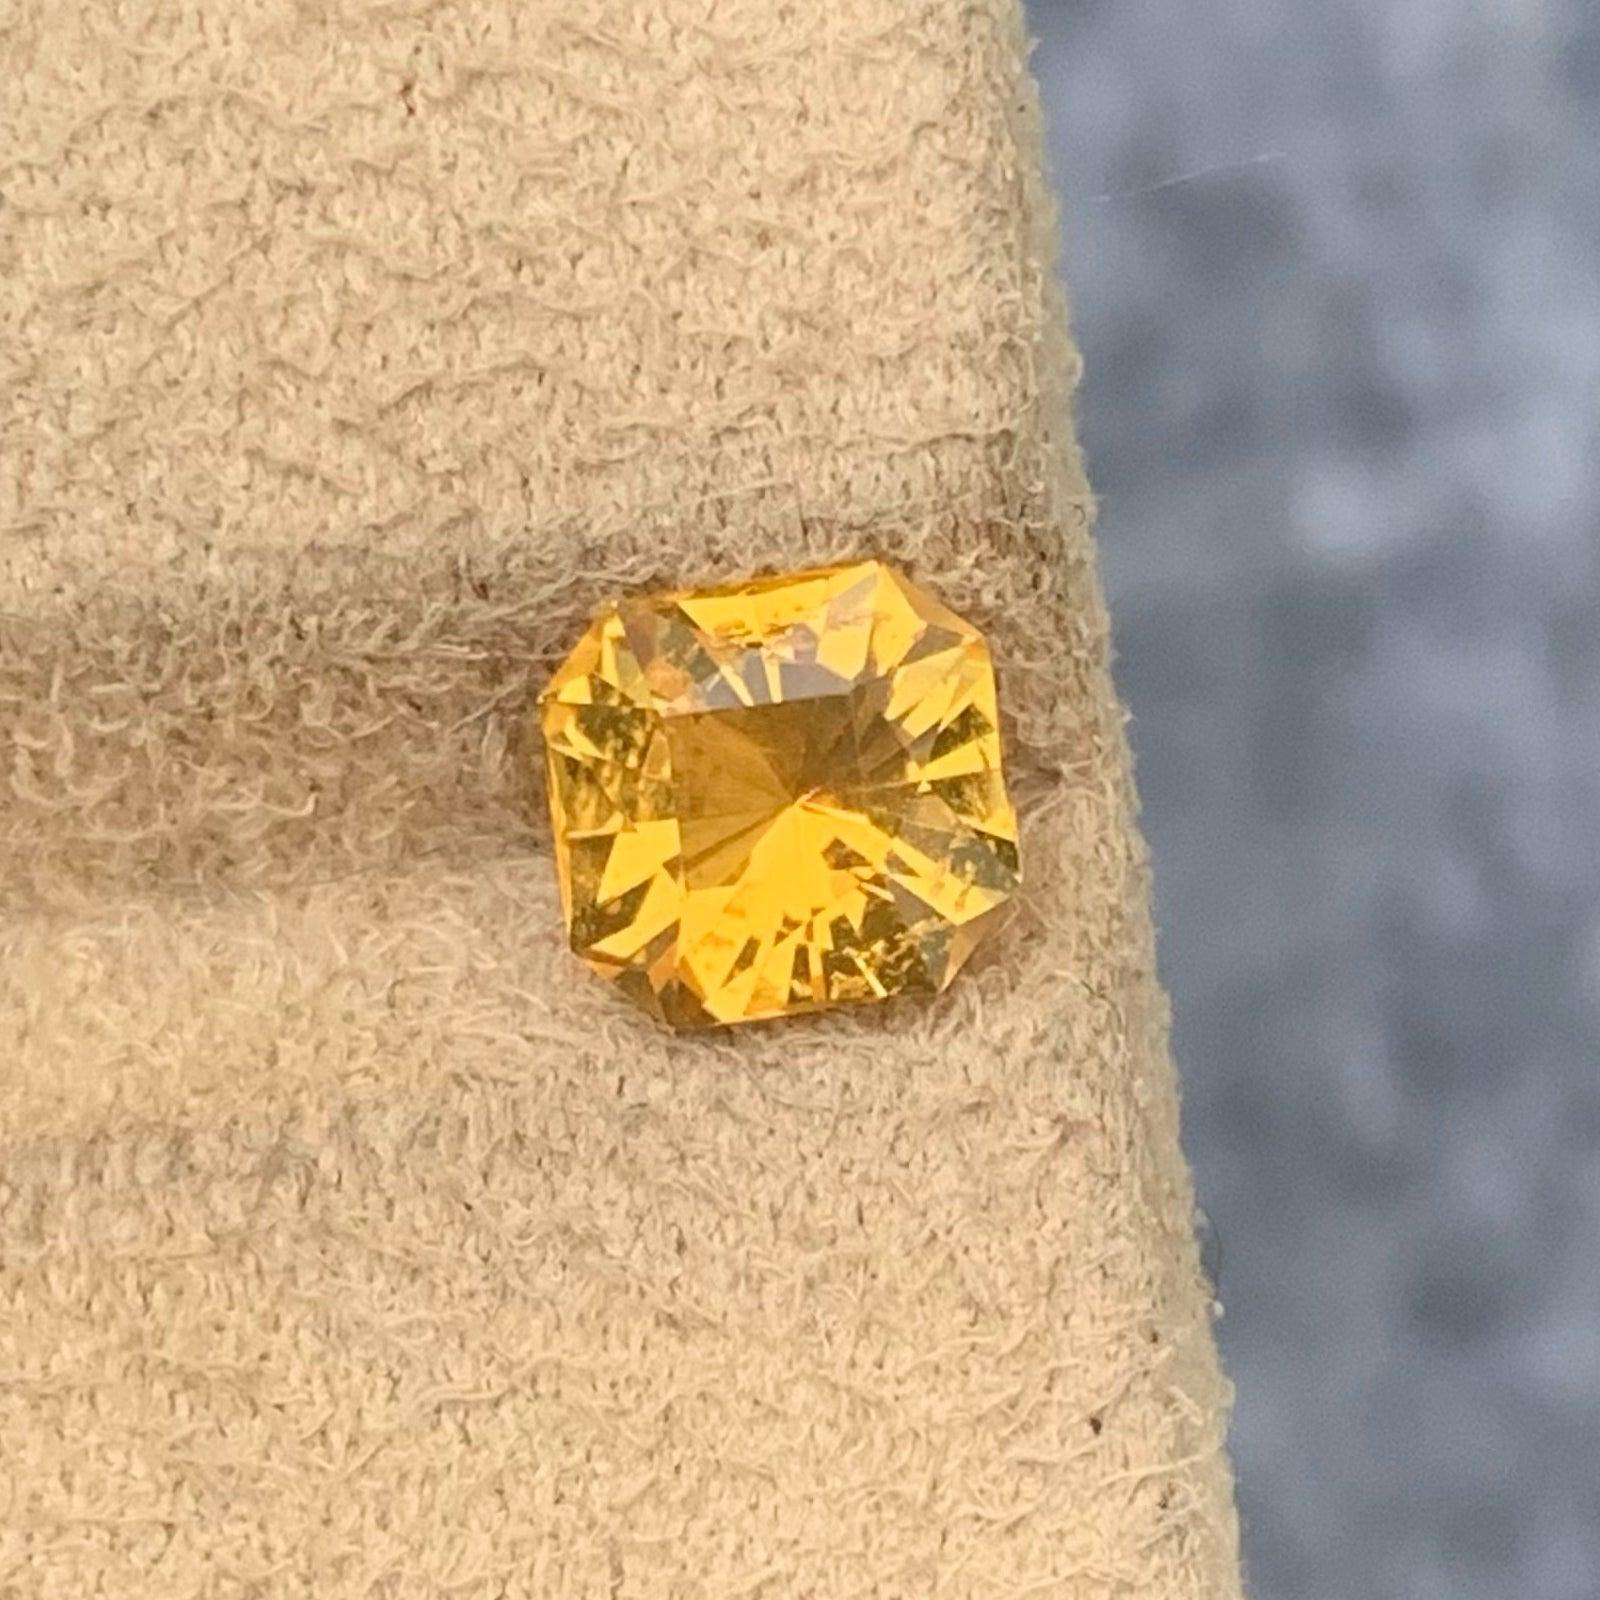 Fancy Yellow Natural Citrine Gemstone of 1.95 carats from Brazil has a wonderful cut in a Octagon shape, incredible Yellow color. Great brilliance. This gem is totally loupe-clean.

Product Information:
GEMSTONE TYPE:	Fancy Yellow Natural Citrine